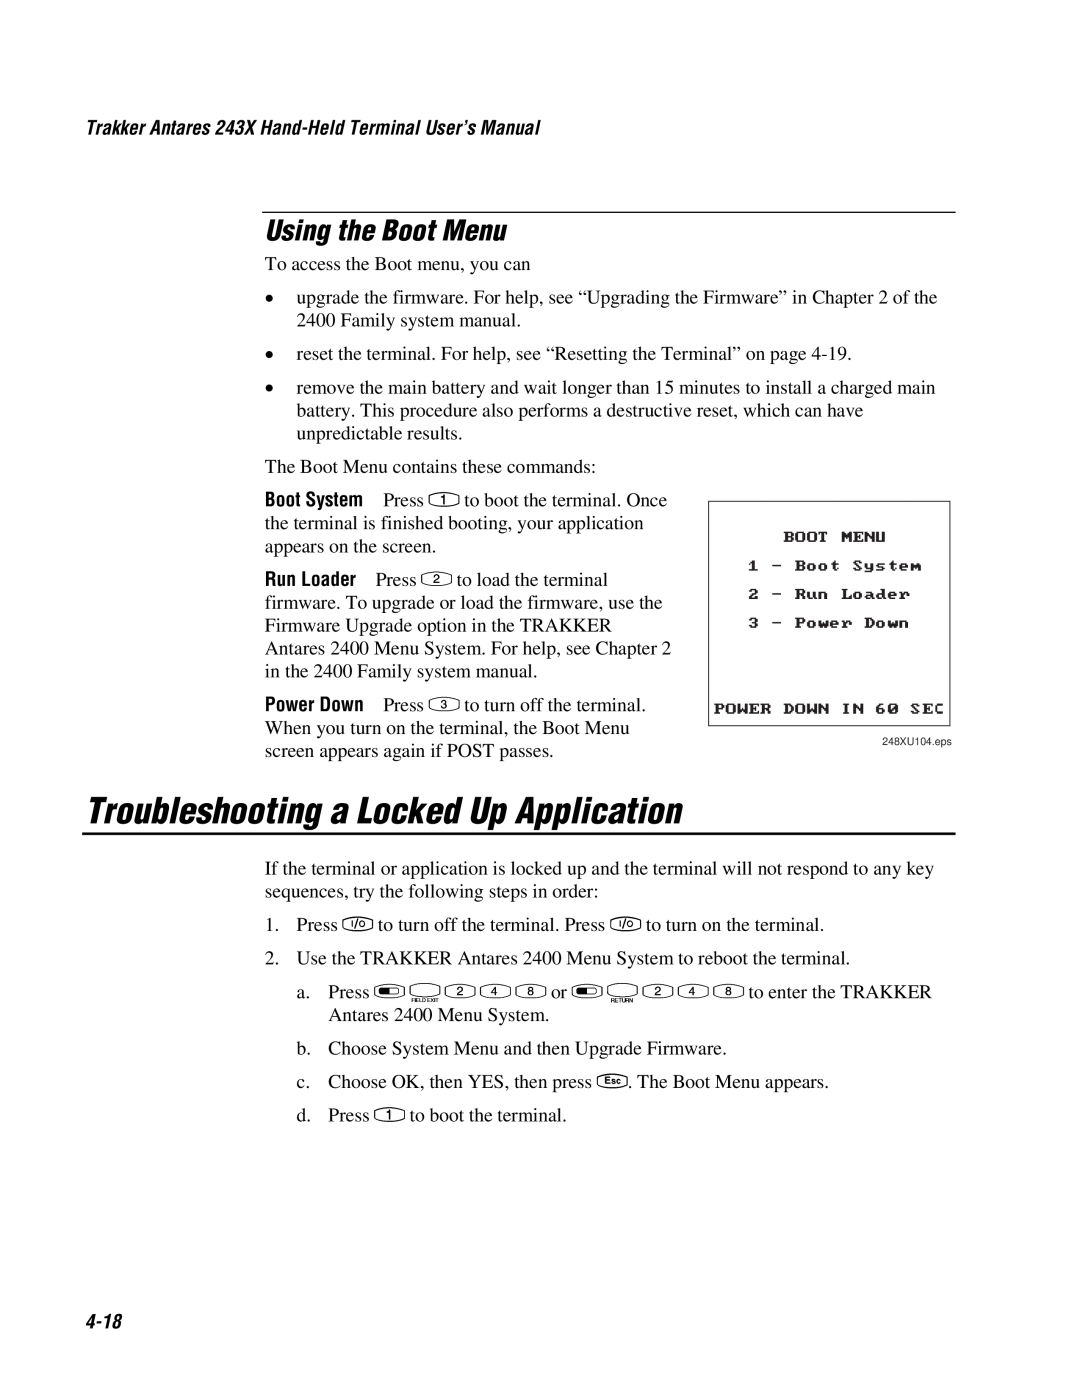 IBM 243X user manual Troubleshooting a Locked Up Application, Using the Boot Menu, 4-18 